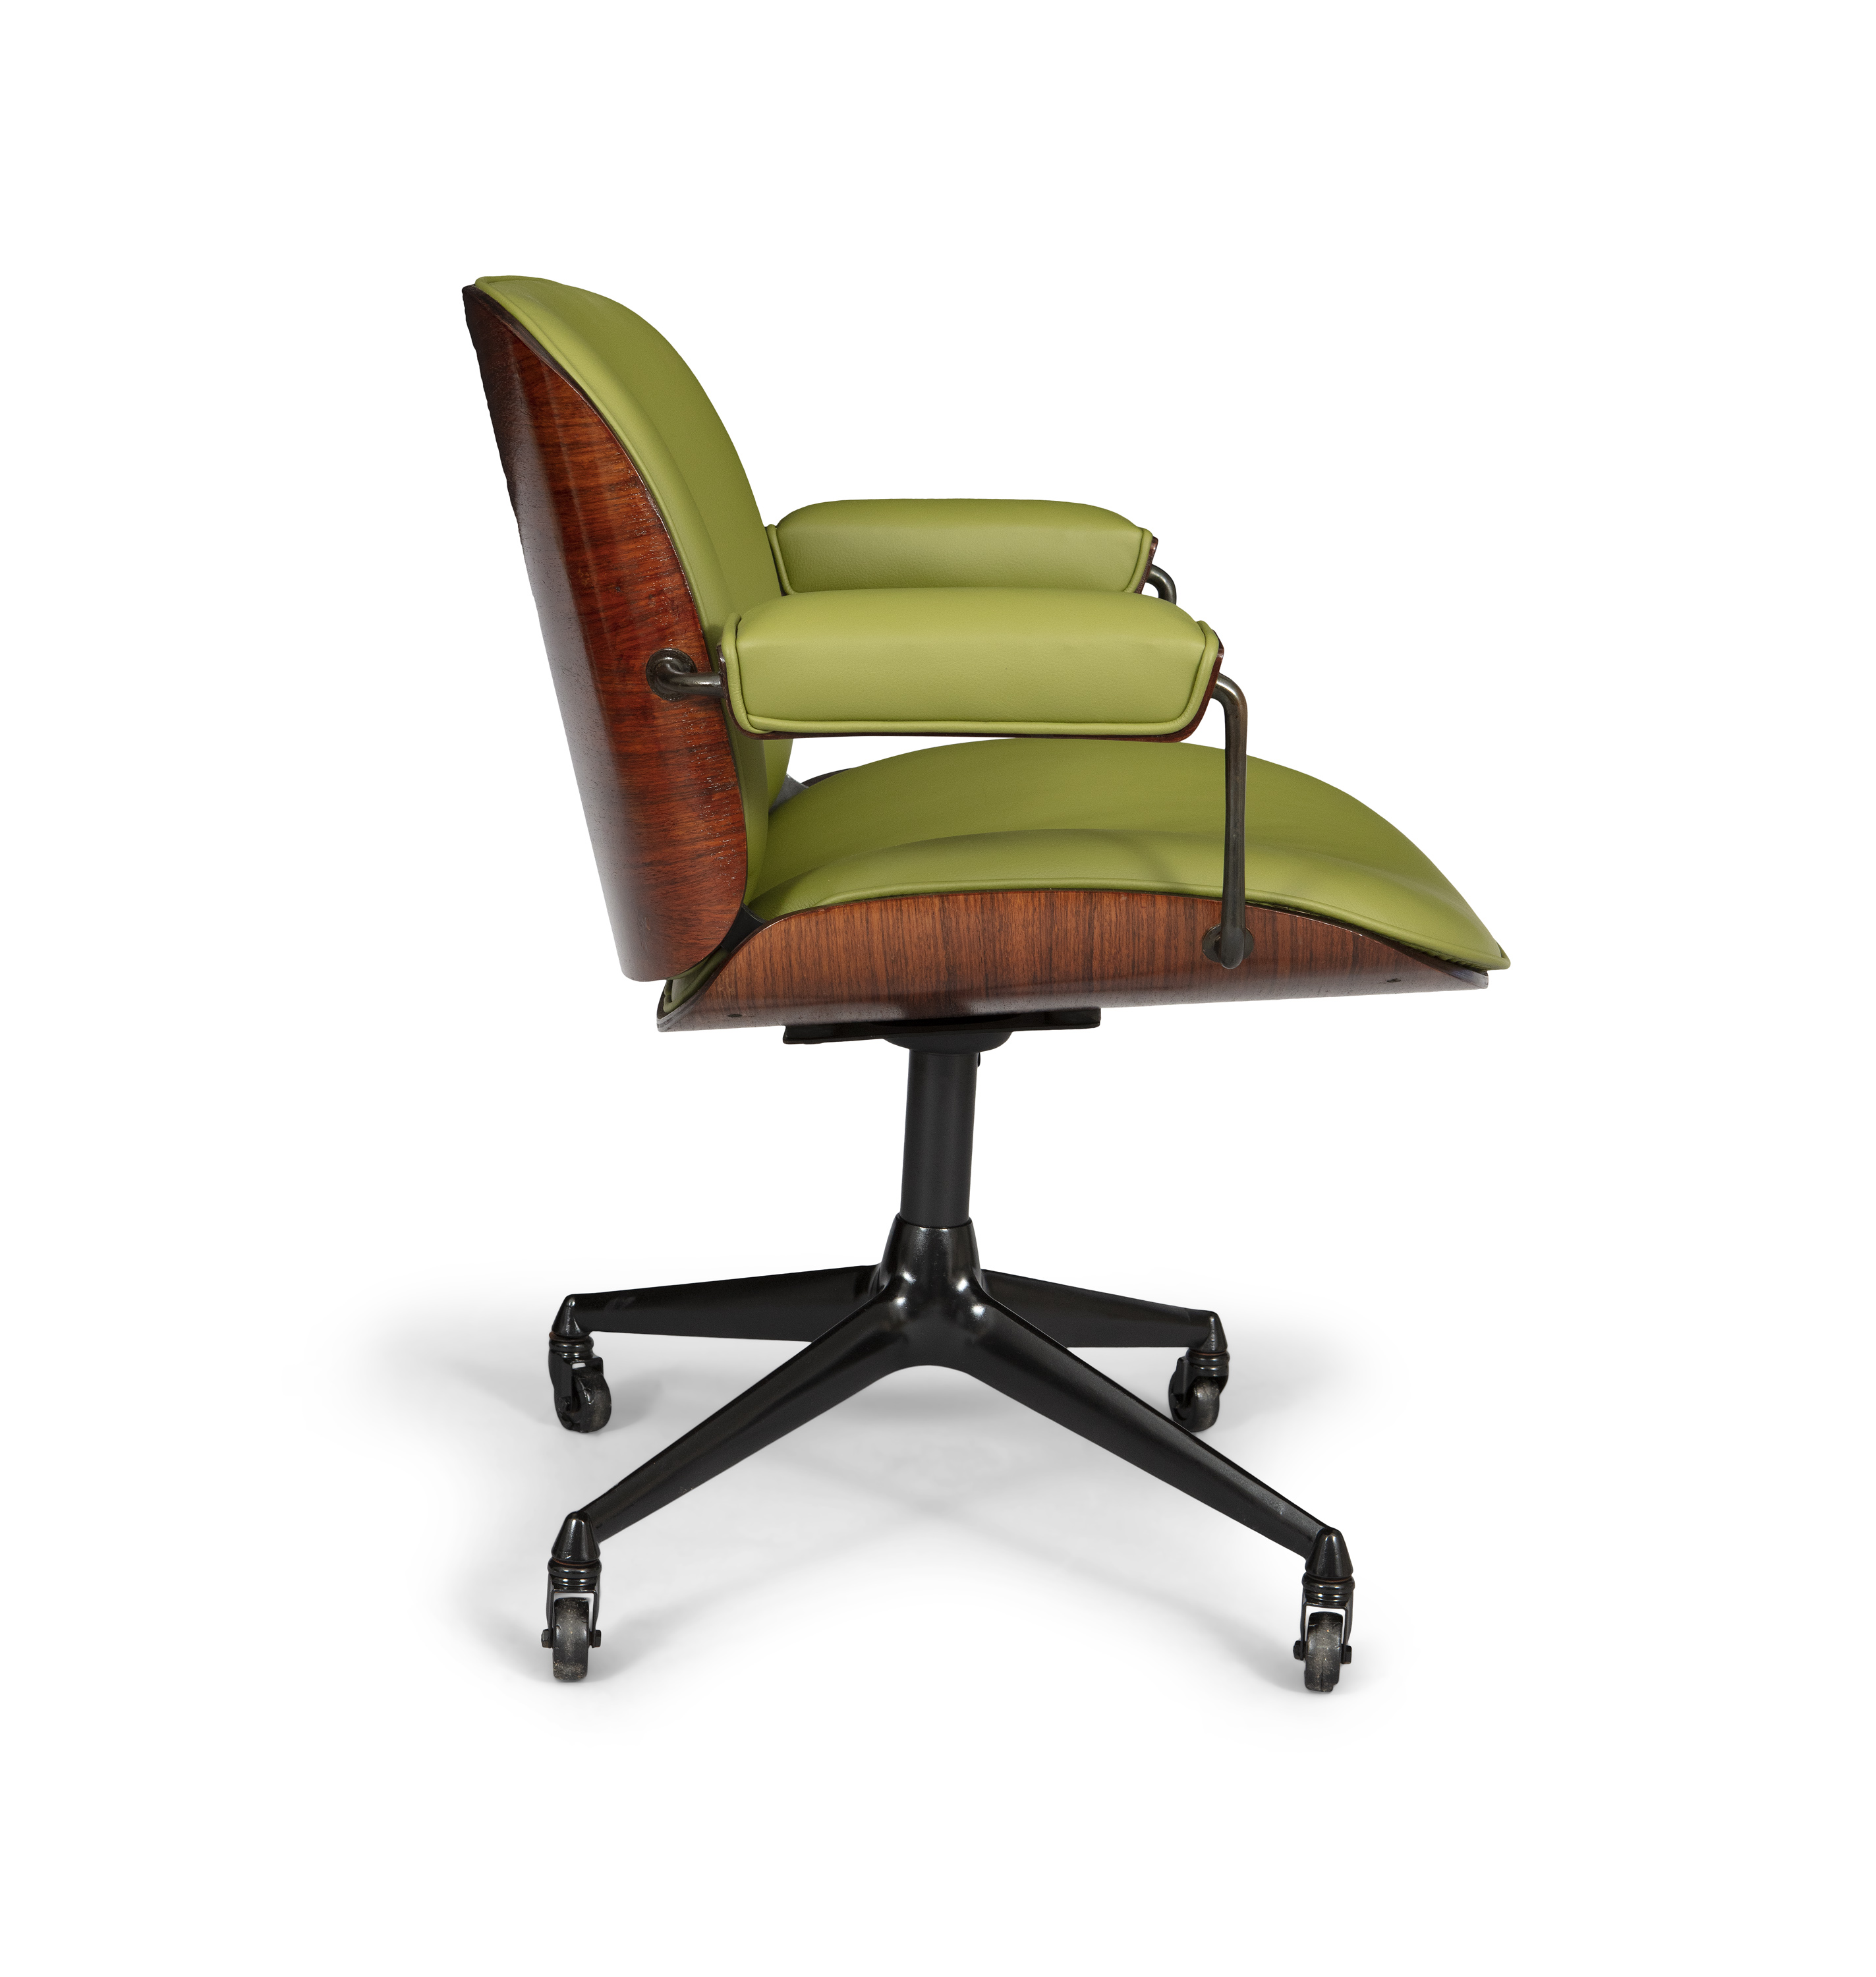 ICO PARISI A rosewood office chair with green leather upholstery by Ico Parisi for MIM, Roma. c. - Image 5 of 6